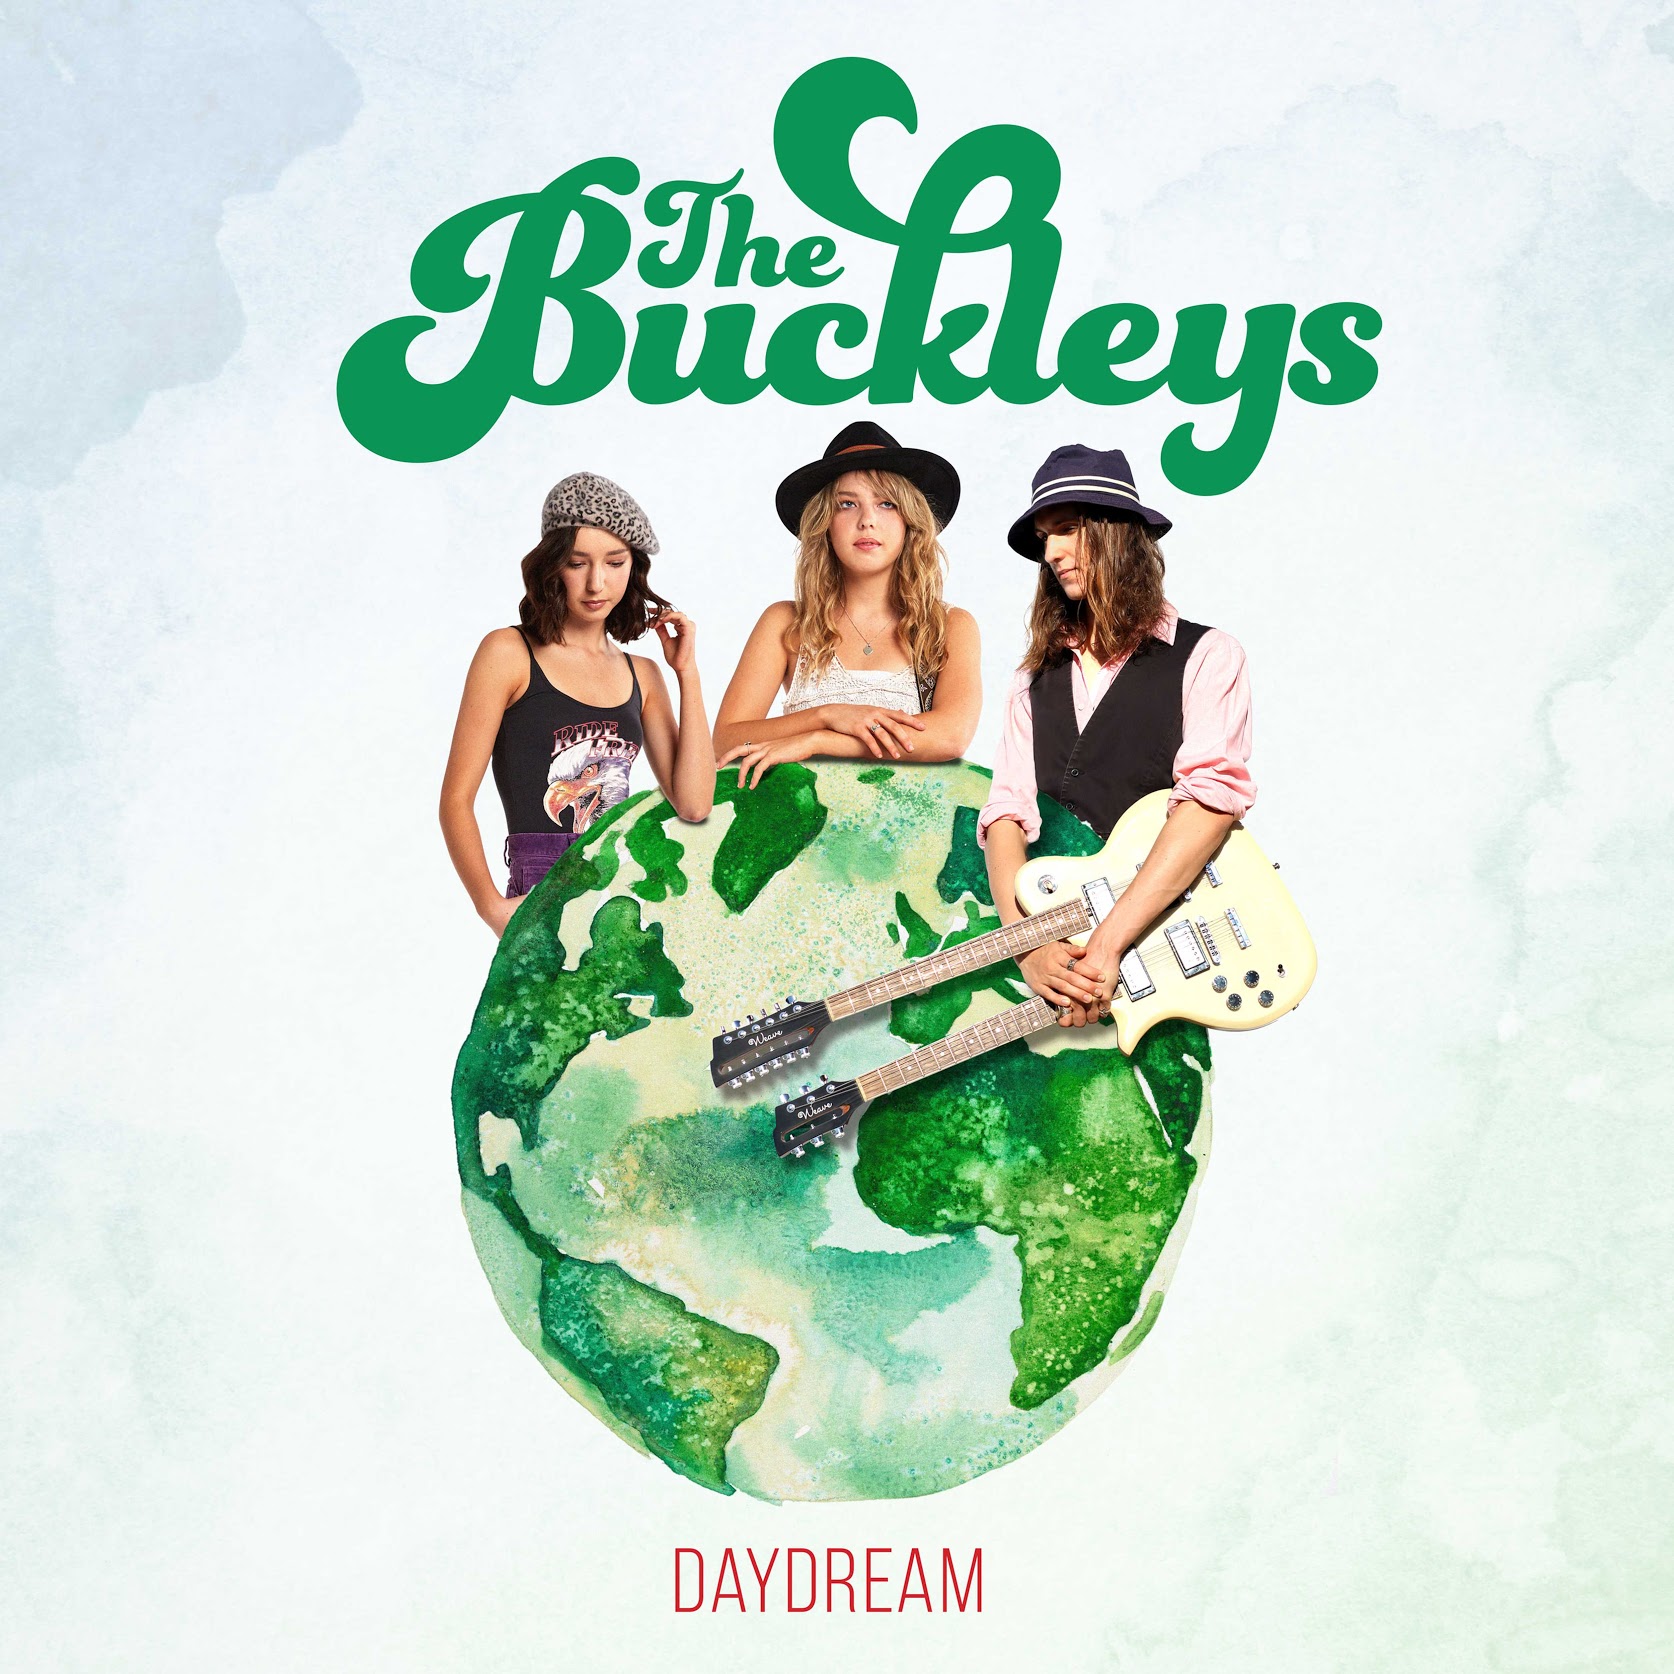 THE BUCKLEYS TO RELEASE THEIR DEBUT ALBUM DAYDREAM WITH SPECIAL LIVE BROADCAST PERFORMANCE PERFORMANCE ‘LIVE FROM BYRON BAY’